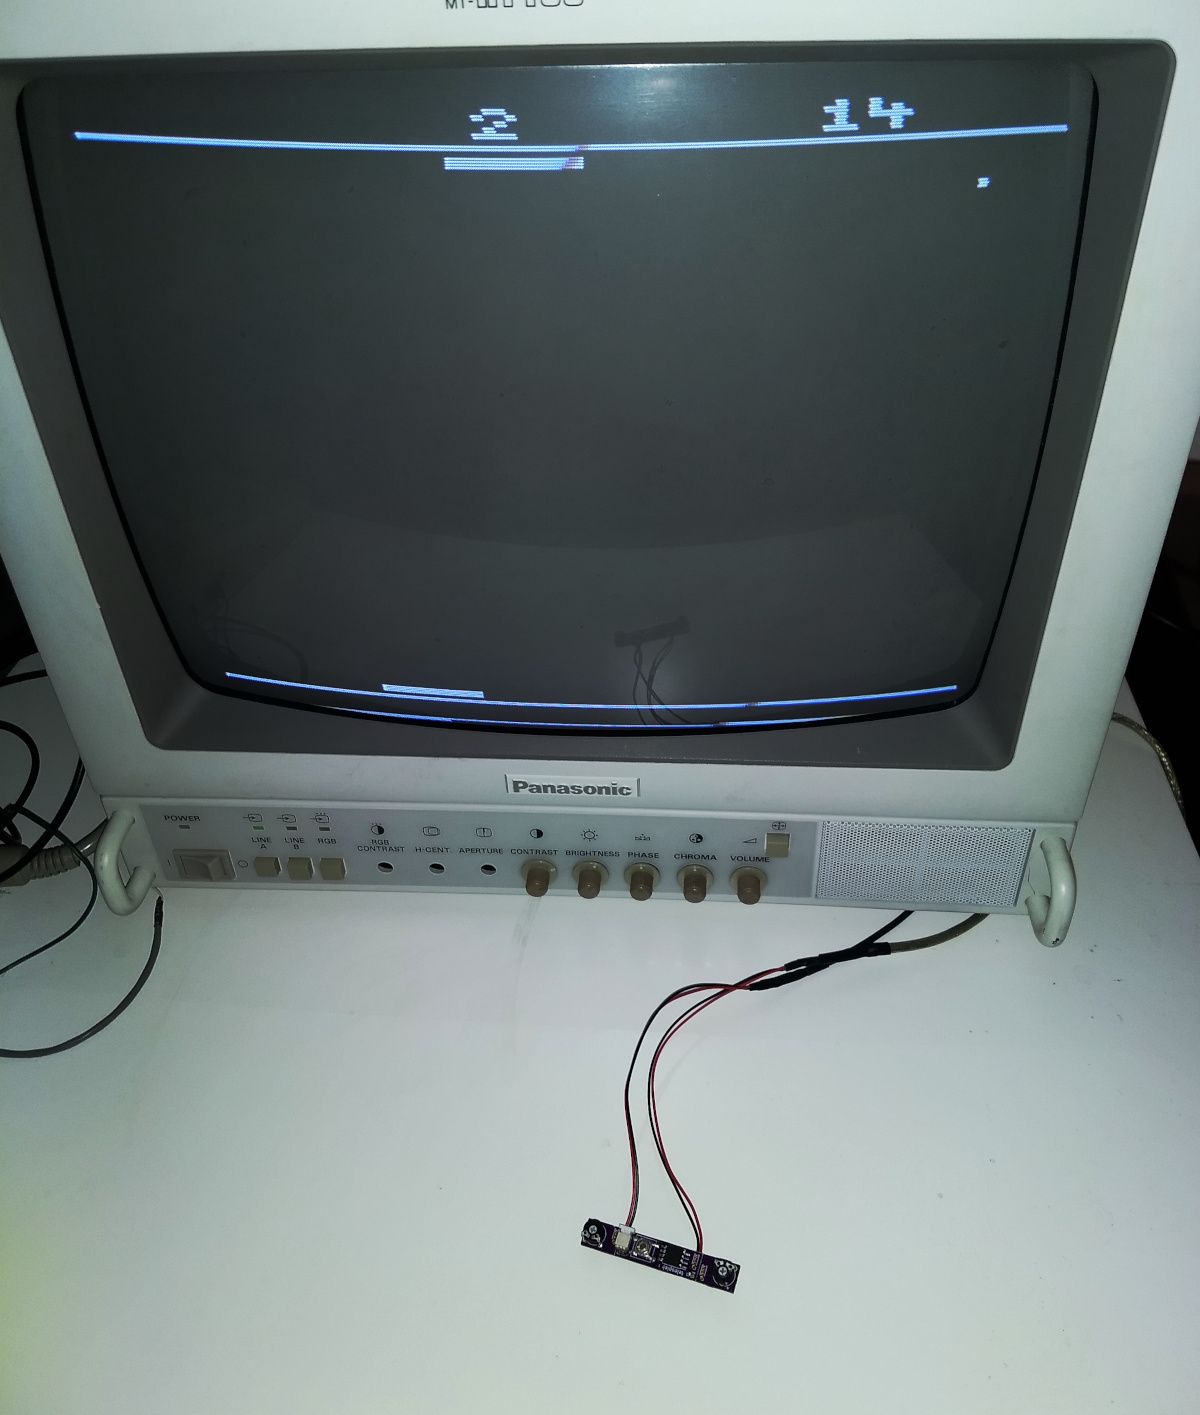 An old CRT video monitor with the circuit board attached to it. It shows a pong-like game.